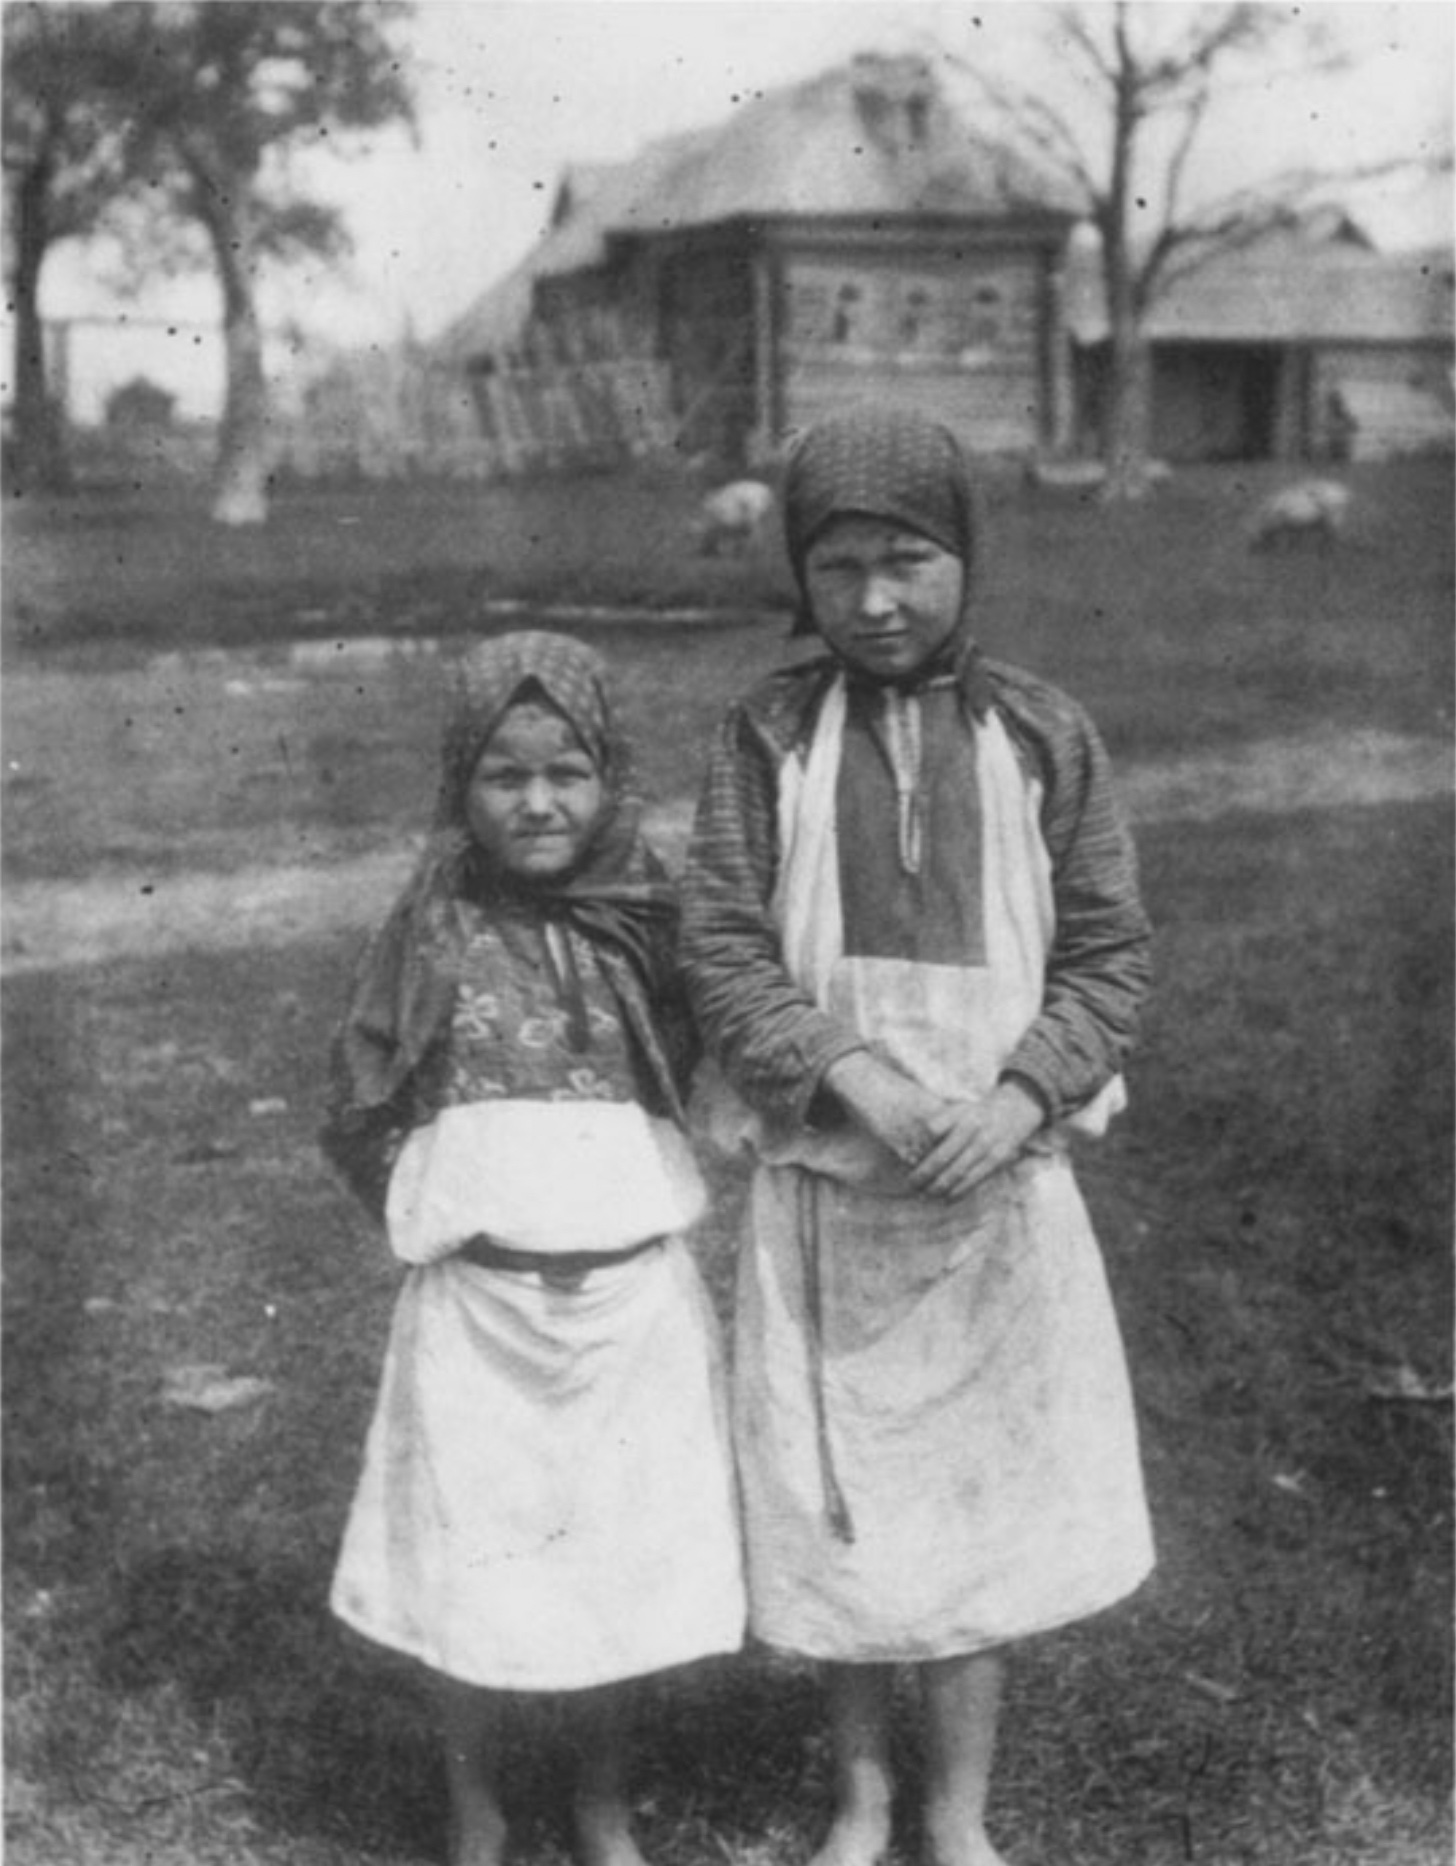 Peasant girls from the village of Kultuki, Kasimov district of Riazan province